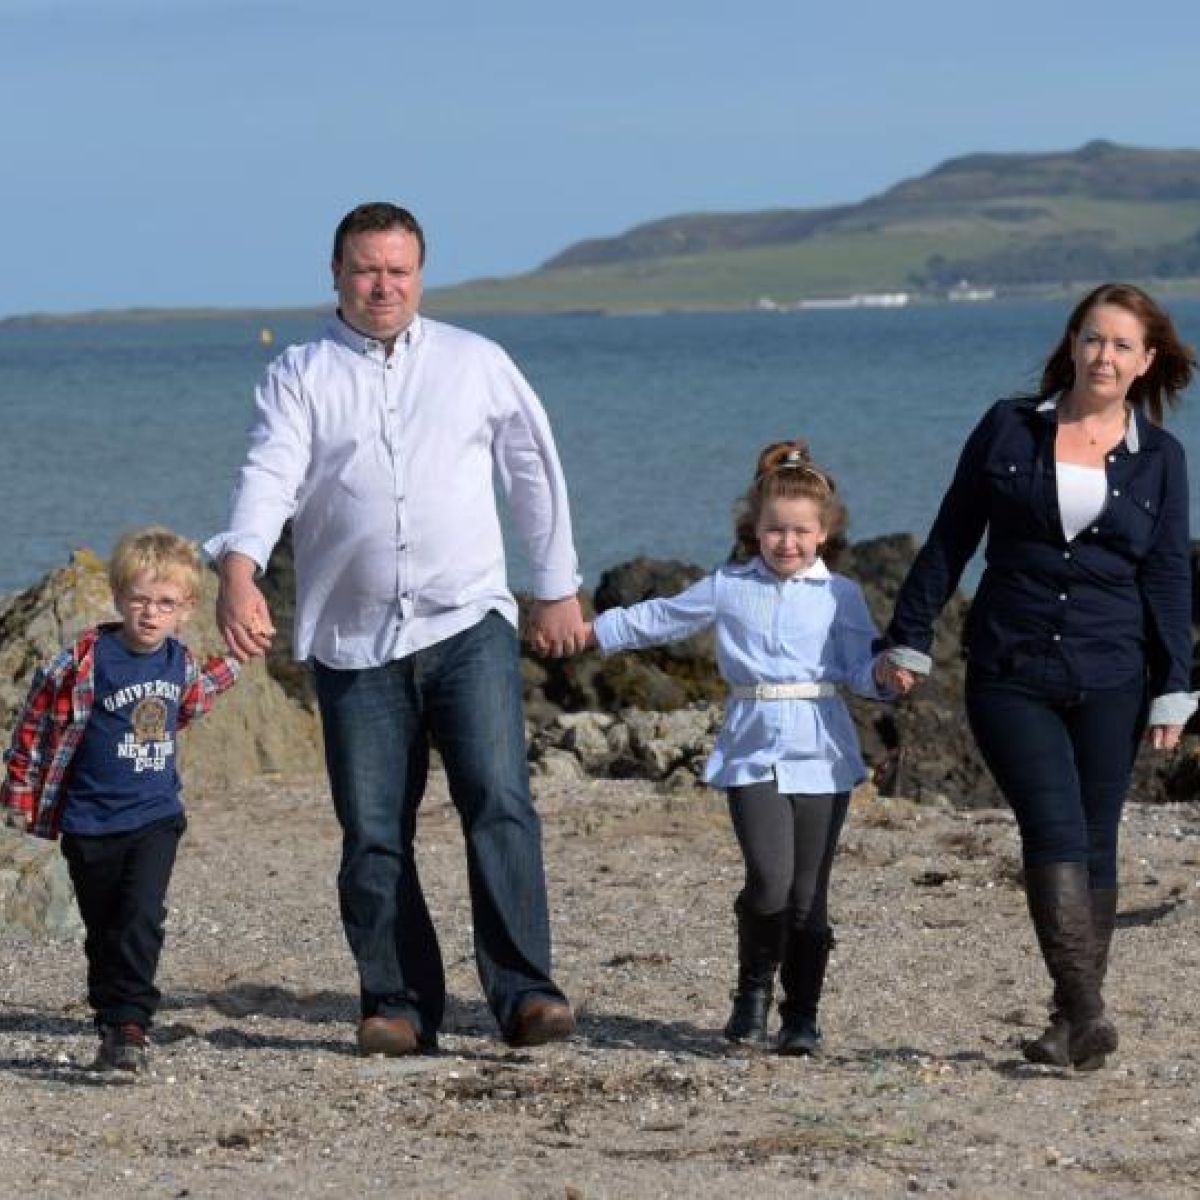 Hotspots: Lifes a beach in Donabate - The Irish Times